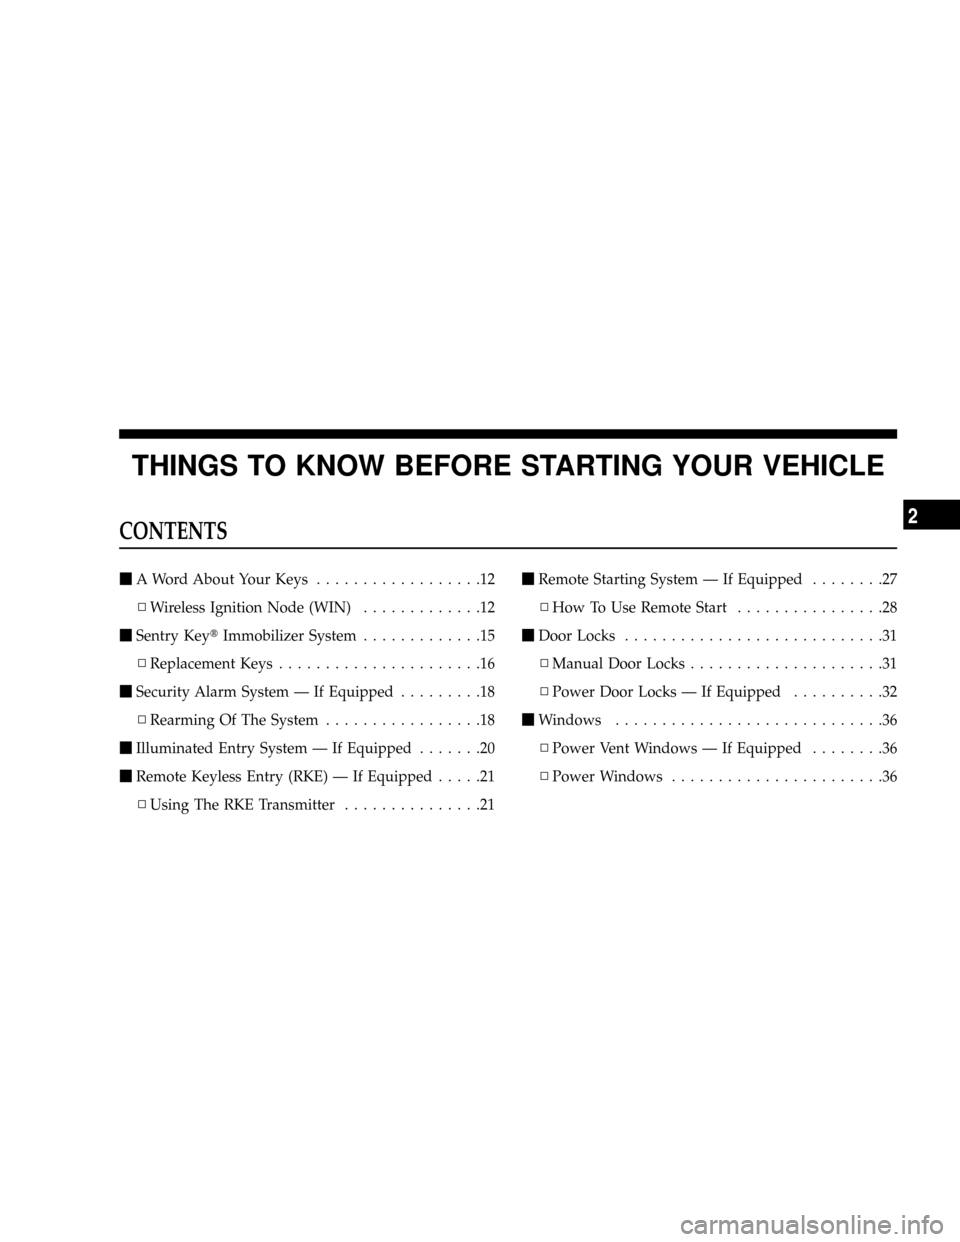 CHRYSLER TOWN AND COUNTRY 2008 5.G Owners Manual THINGS TO KNOW BEFORE STARTING YOUR VEHICLE
CONTENTS
mA Word About Your Keys..................12
NWireless Ignition Node (WIN).............12
mSentry KeytImmobilizer System.............15
NReplacement